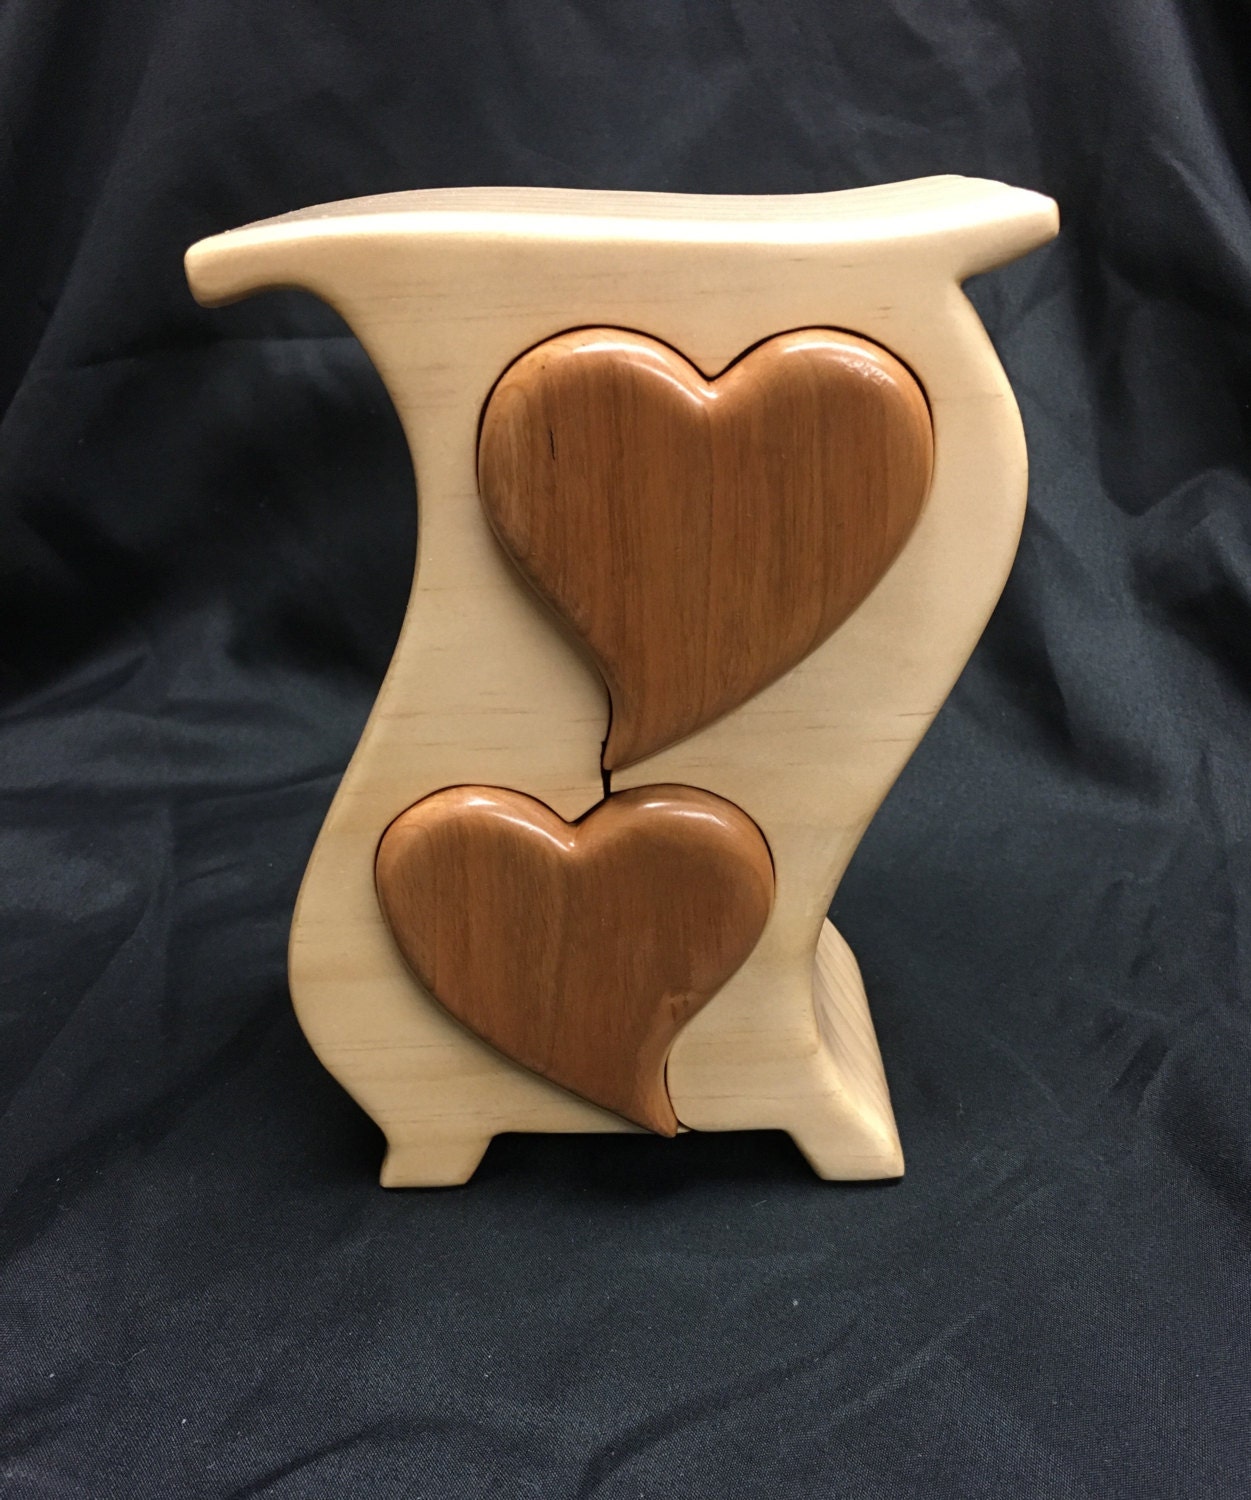 Handcrafted bandsaw jewelry / stash / trinket box with heart